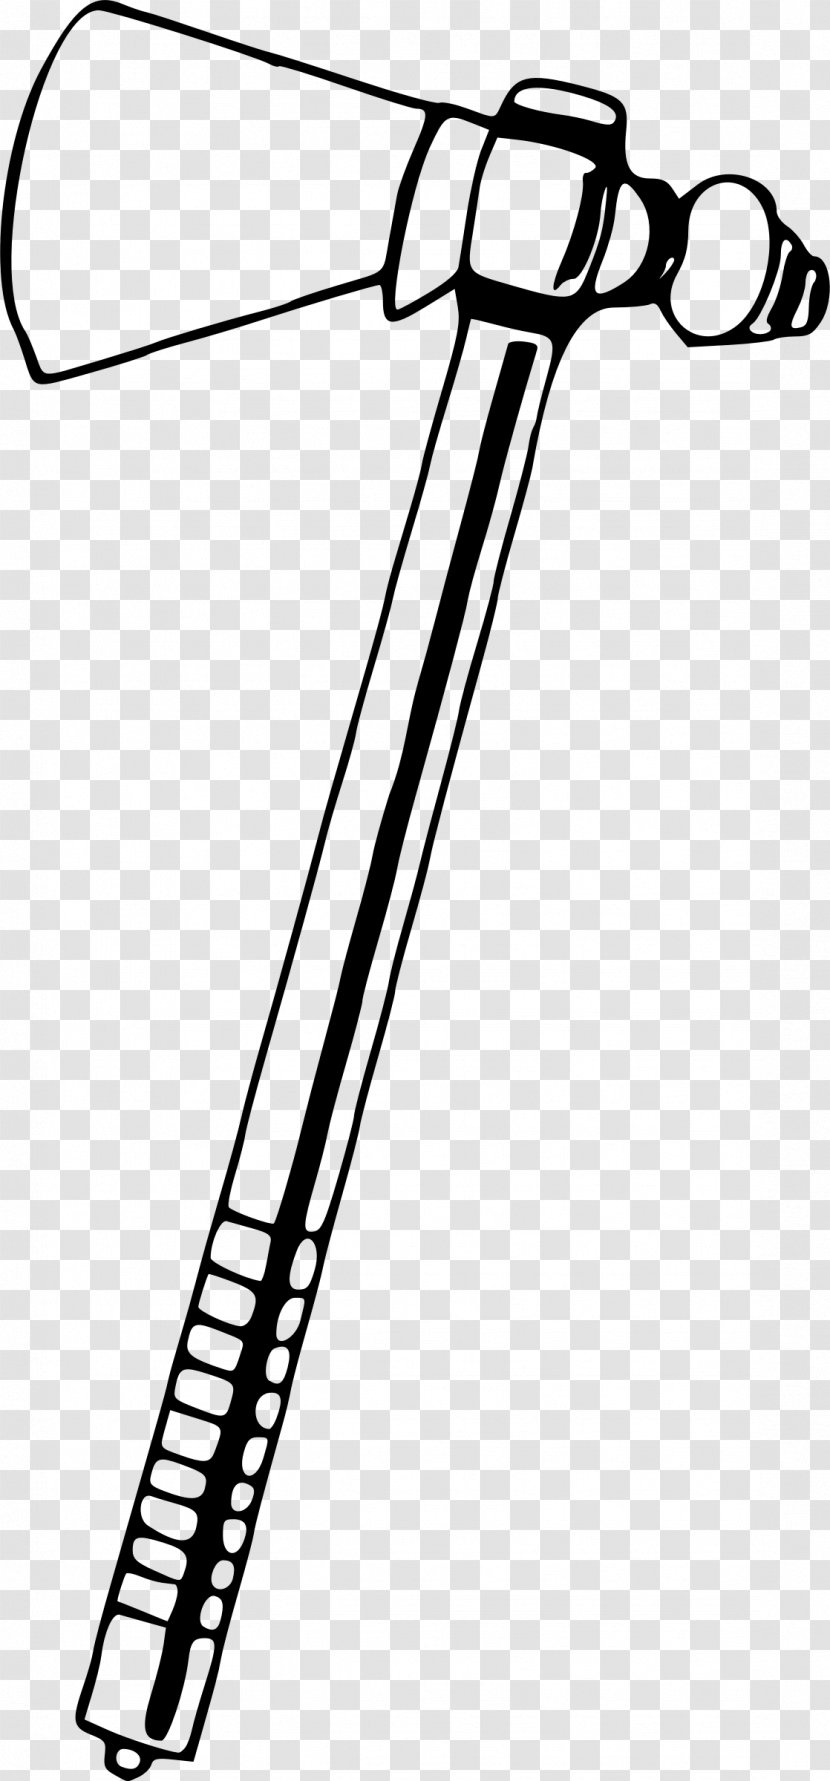 Tomahawk Knife Hatchet Indigenous Peoples Of The Americas Clip Art - Native Americans In United States - Axe Transparent PNG